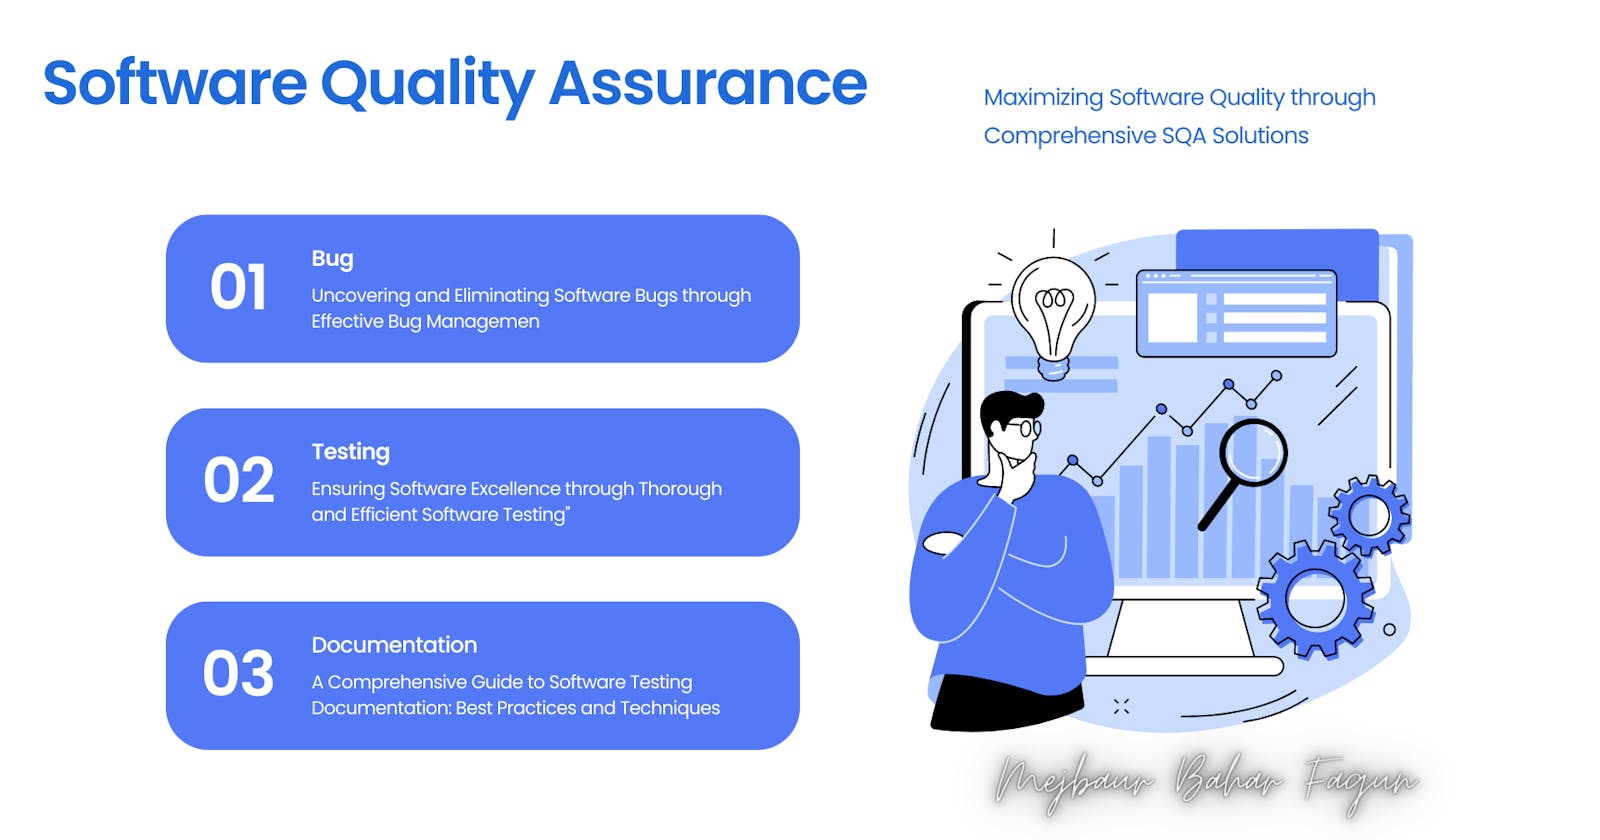 Achieving Your Career Goals in SQA: A Step-by-Step Guide to Landing Your Next Software Quality Assurance Job